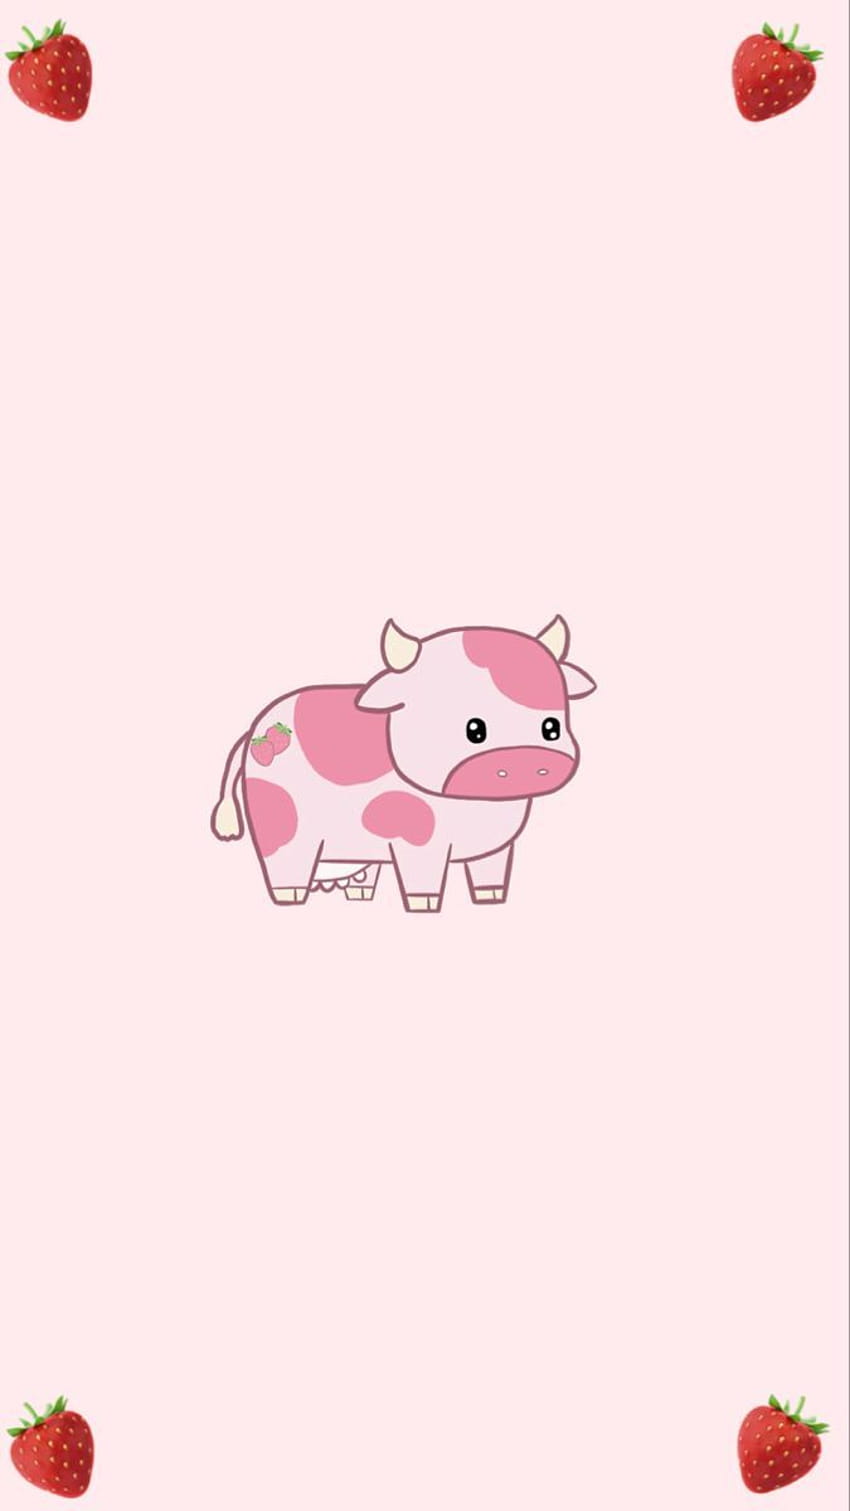 Strawberry cow  wallpaper  Cow wallpaper Cow drawing Strawberry  cow wallpaper iphone